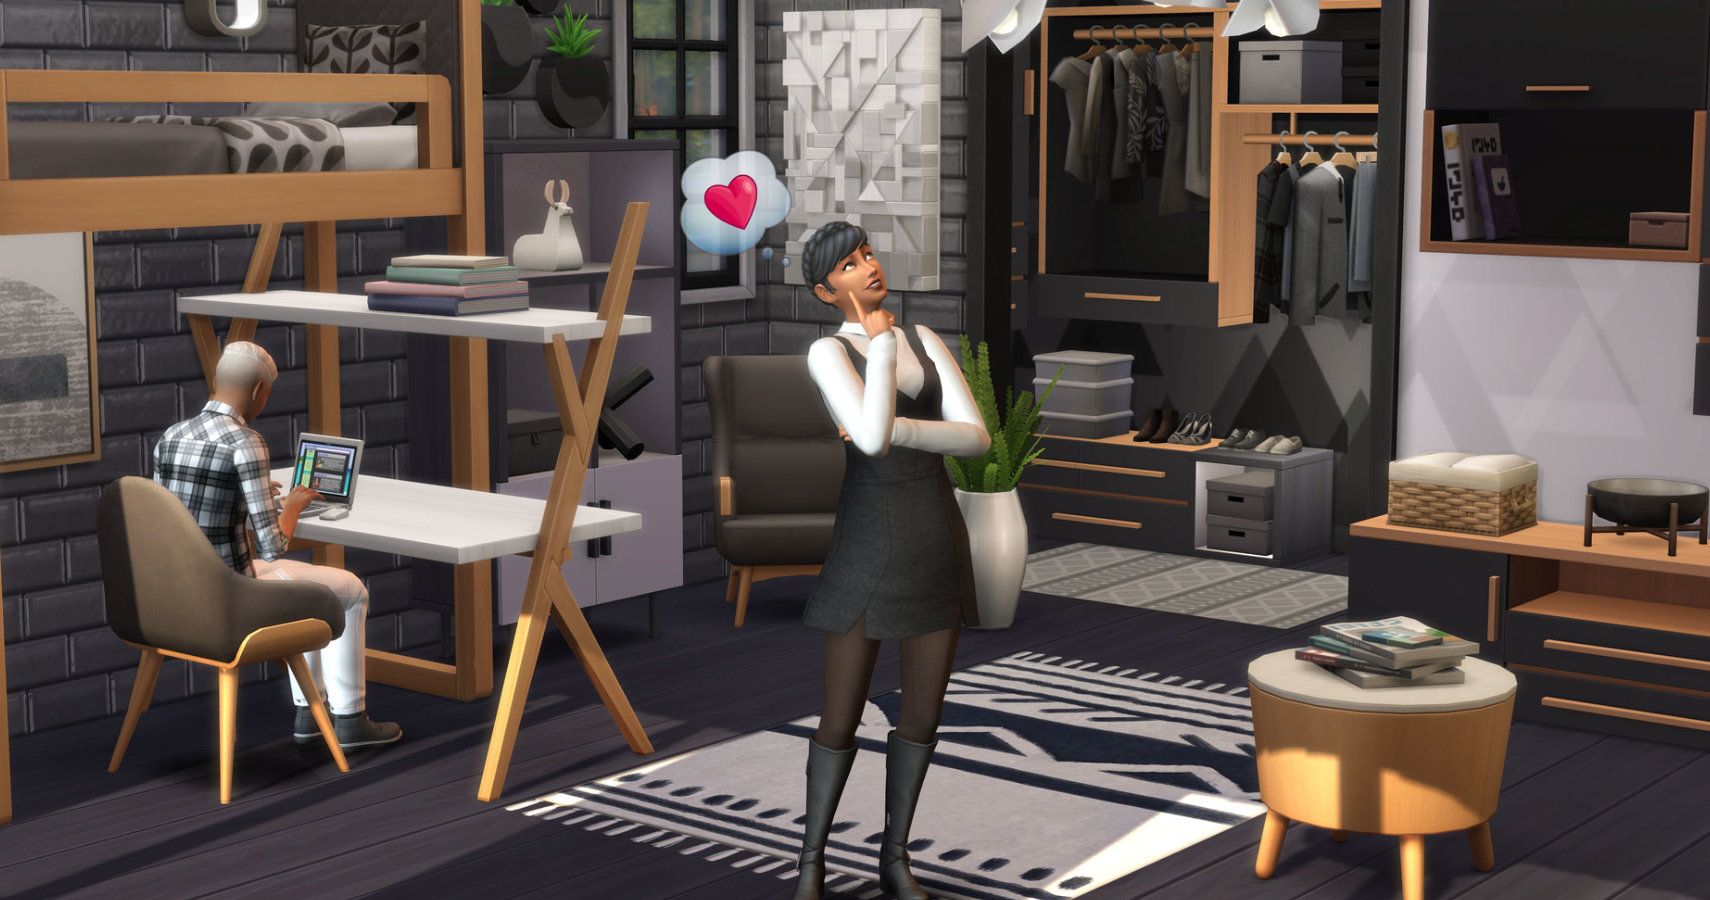 Sims 4 decor sim in newly revamped home